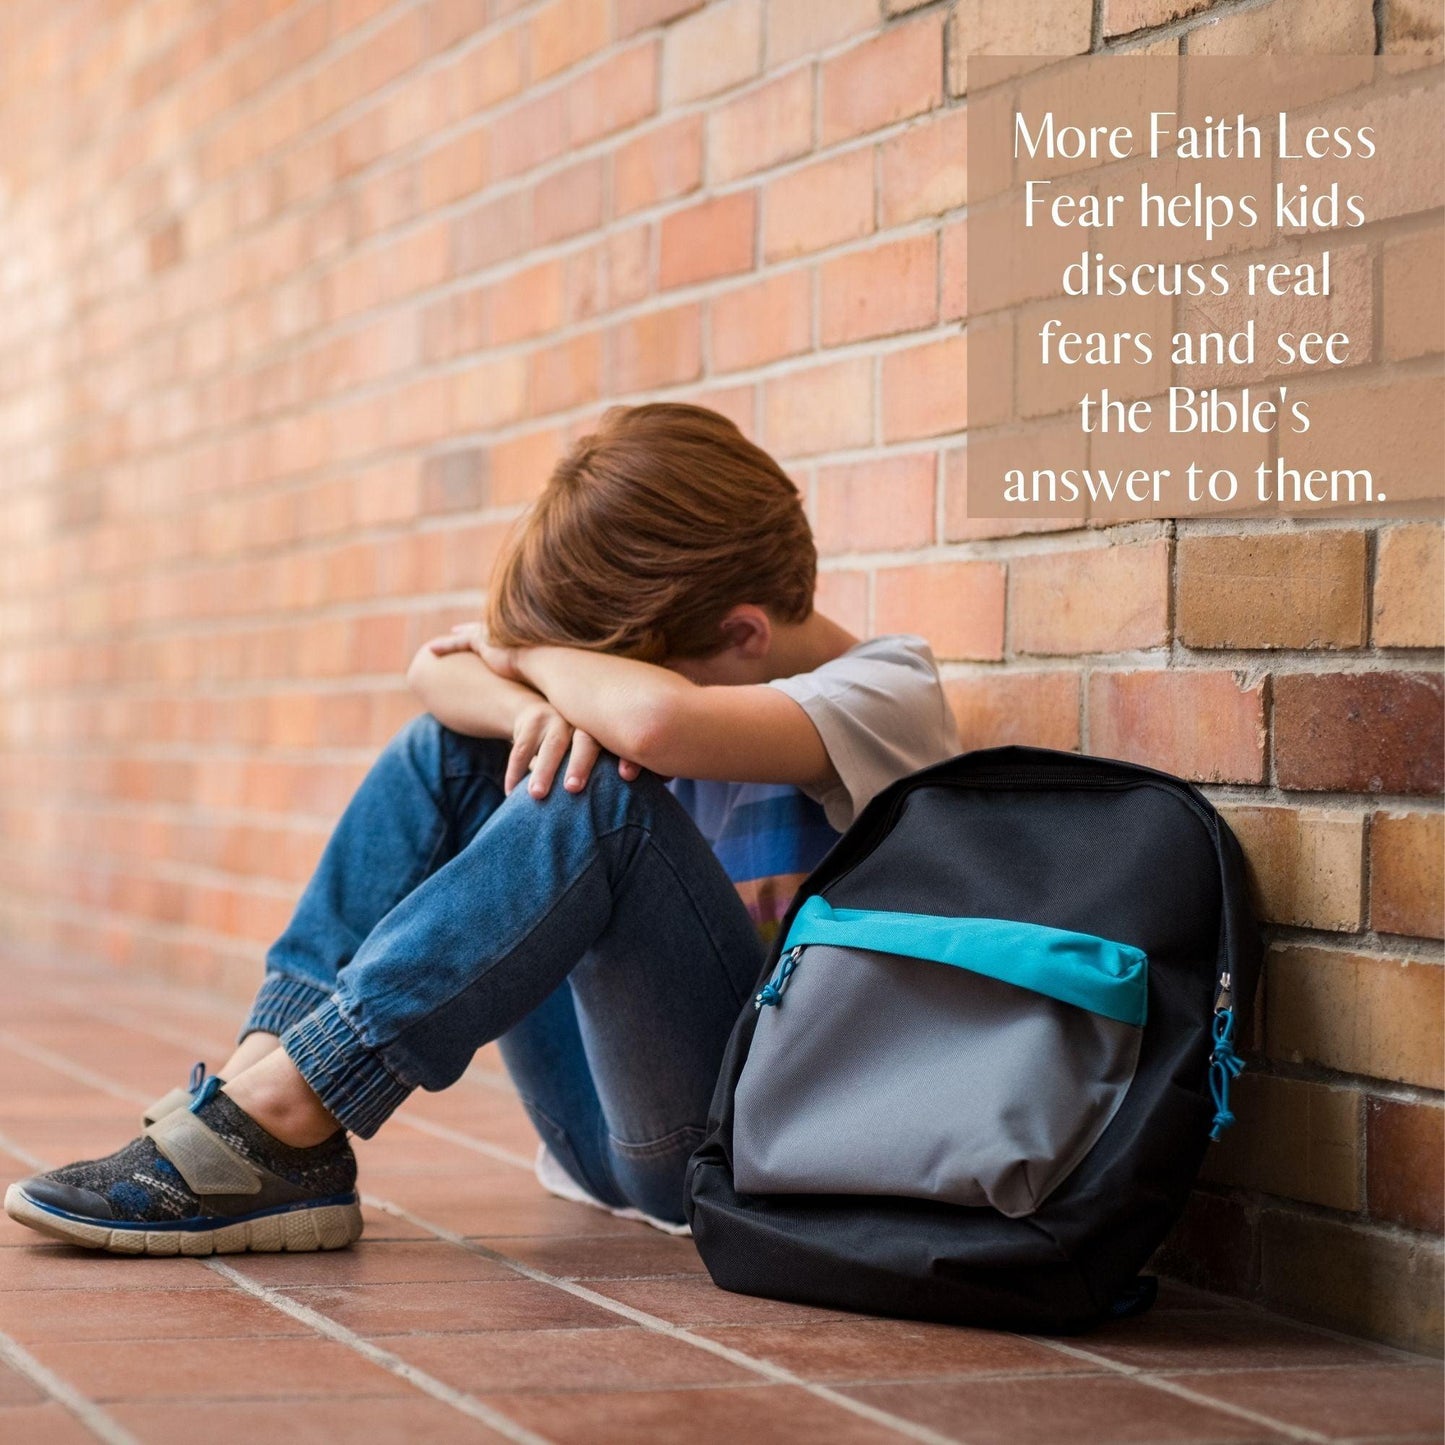 More FAITH Less FEAR: 4-Week Children's Ministry Curriculum  (download only) - Sunday School Store 